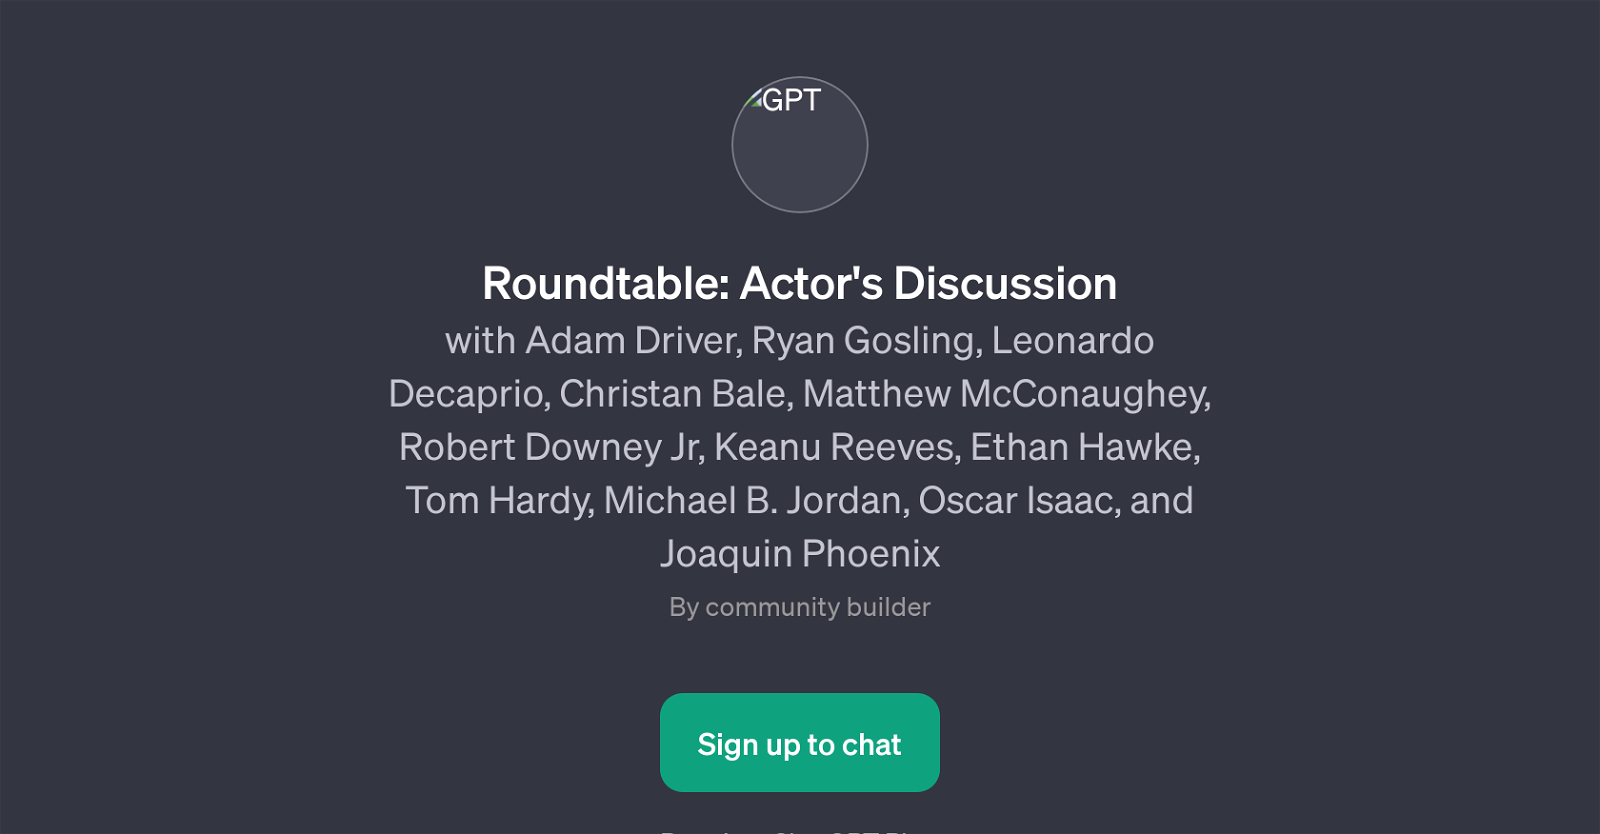 Roundtable: Actor's Discussion website